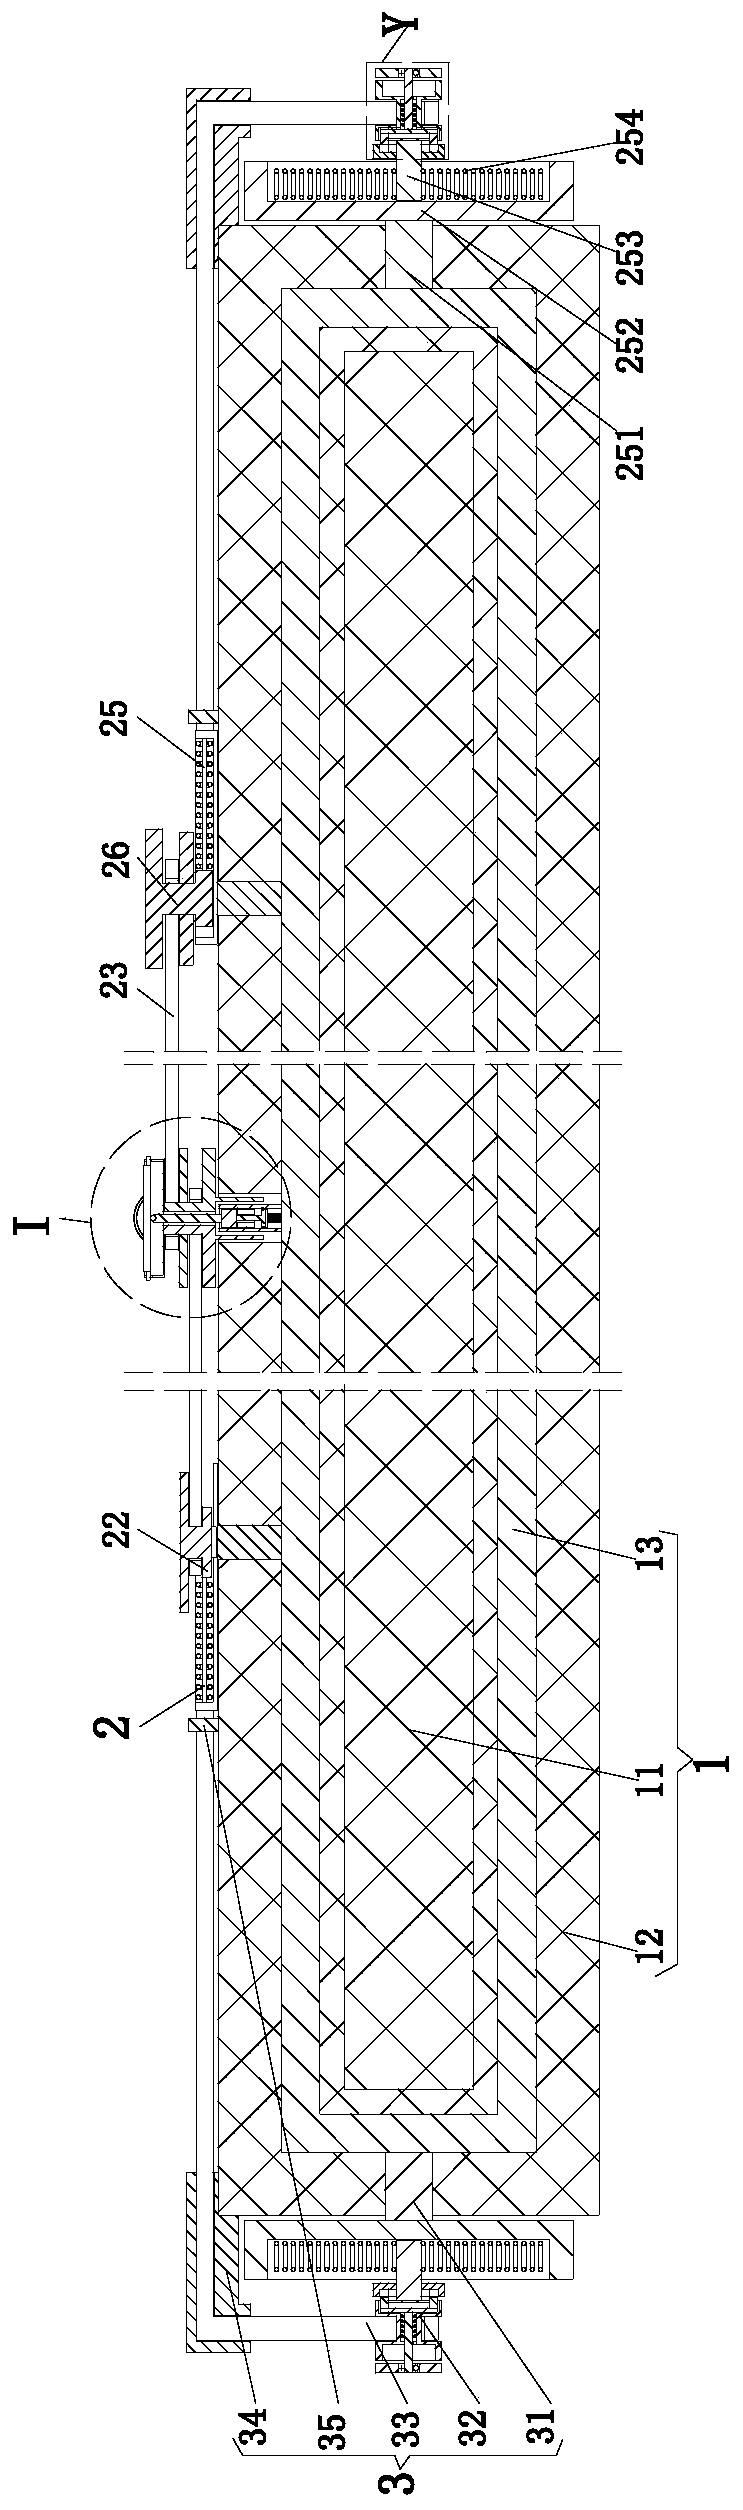 Polymer lithium battery applicable to deformation